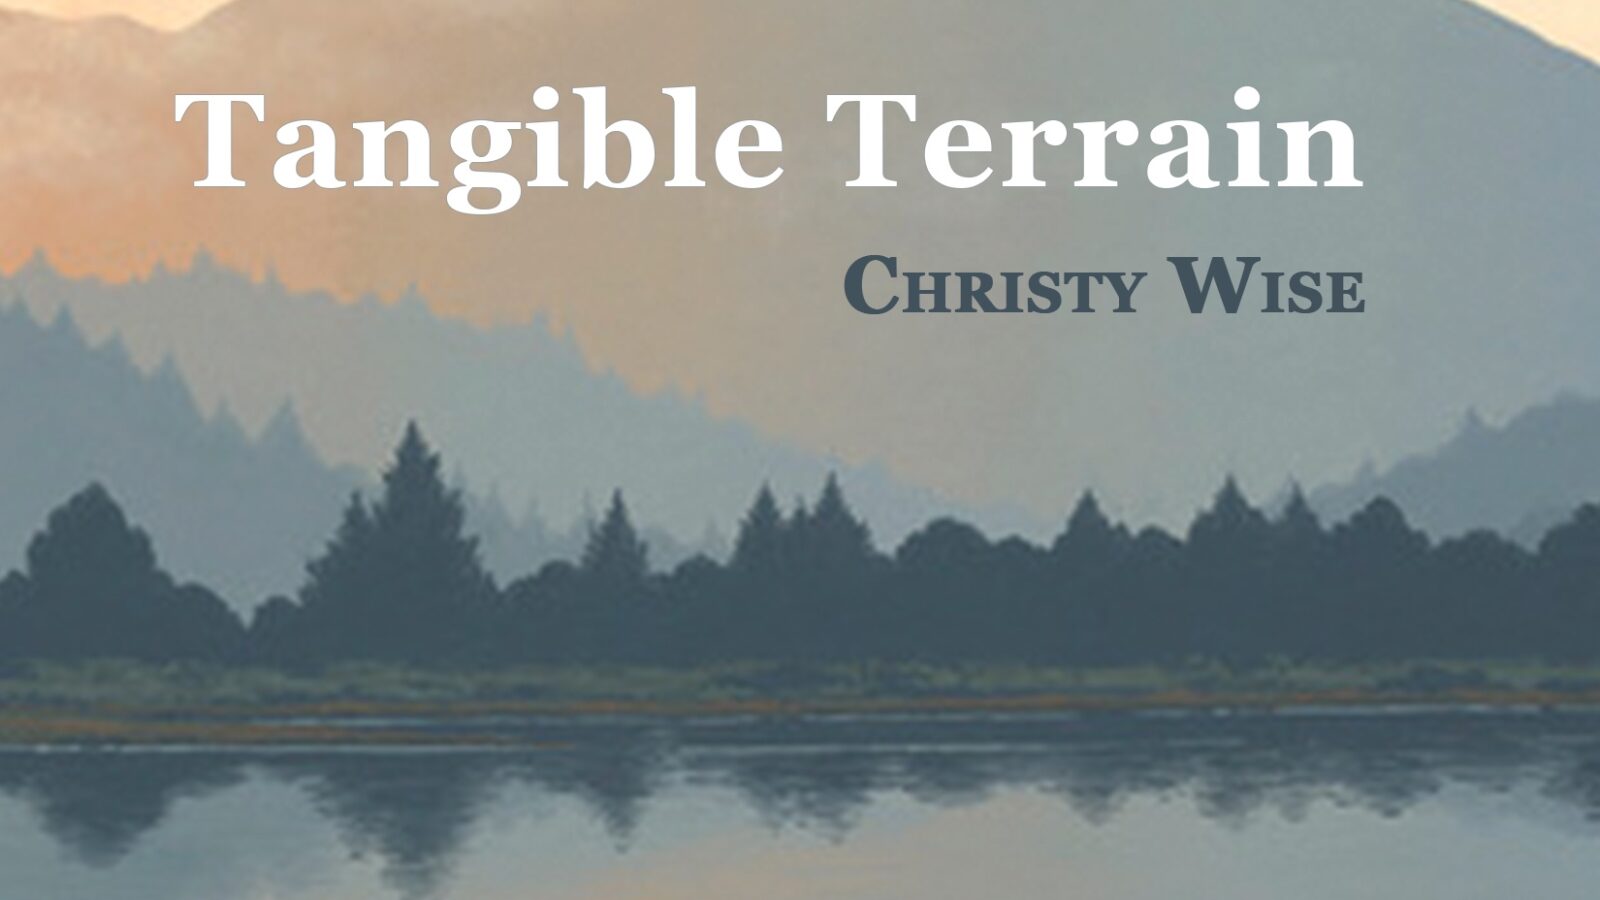 Tangible Terrain by Christy Wise Book Cover